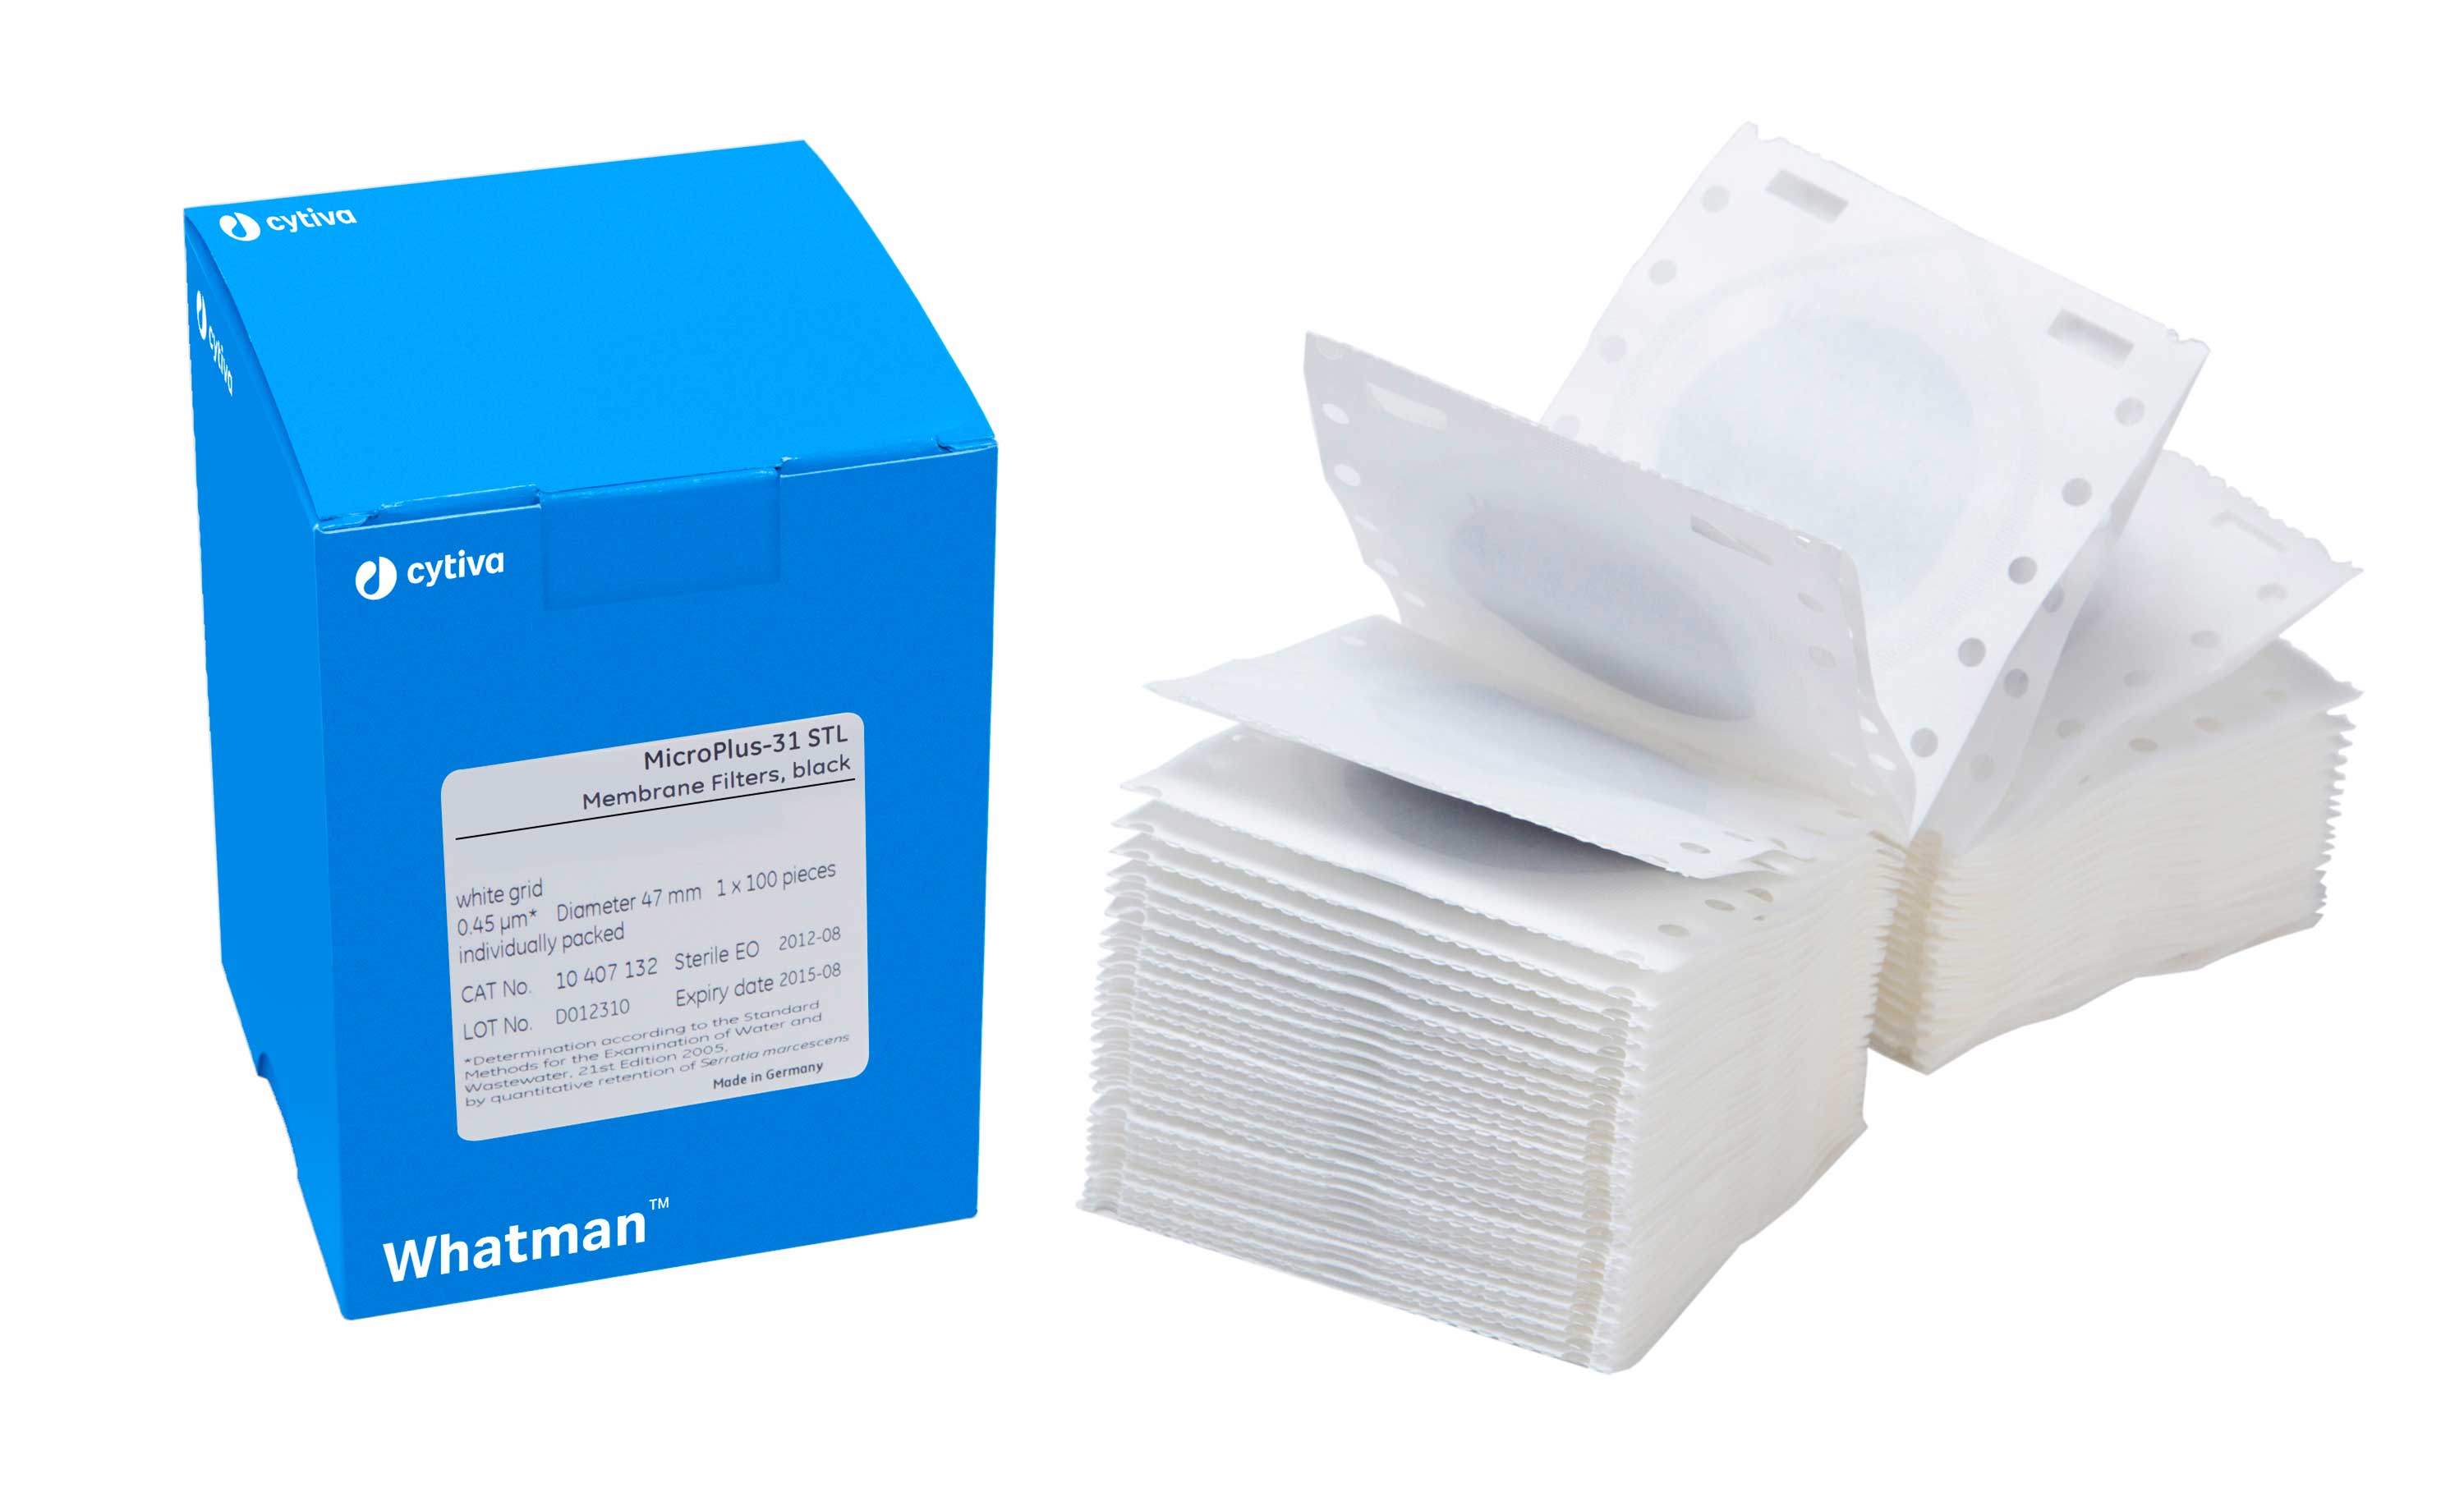 Filtration sterile cellulose nitrate membrane Microplus. Whatman™ (Cytiva). Material: Microplus-21STL. Ø (mm): 47. Porus size (µm): 0.45. Sterile: Yes. Grid: Black. Colour: White. Compatible with the Whatman Membrane-Butler